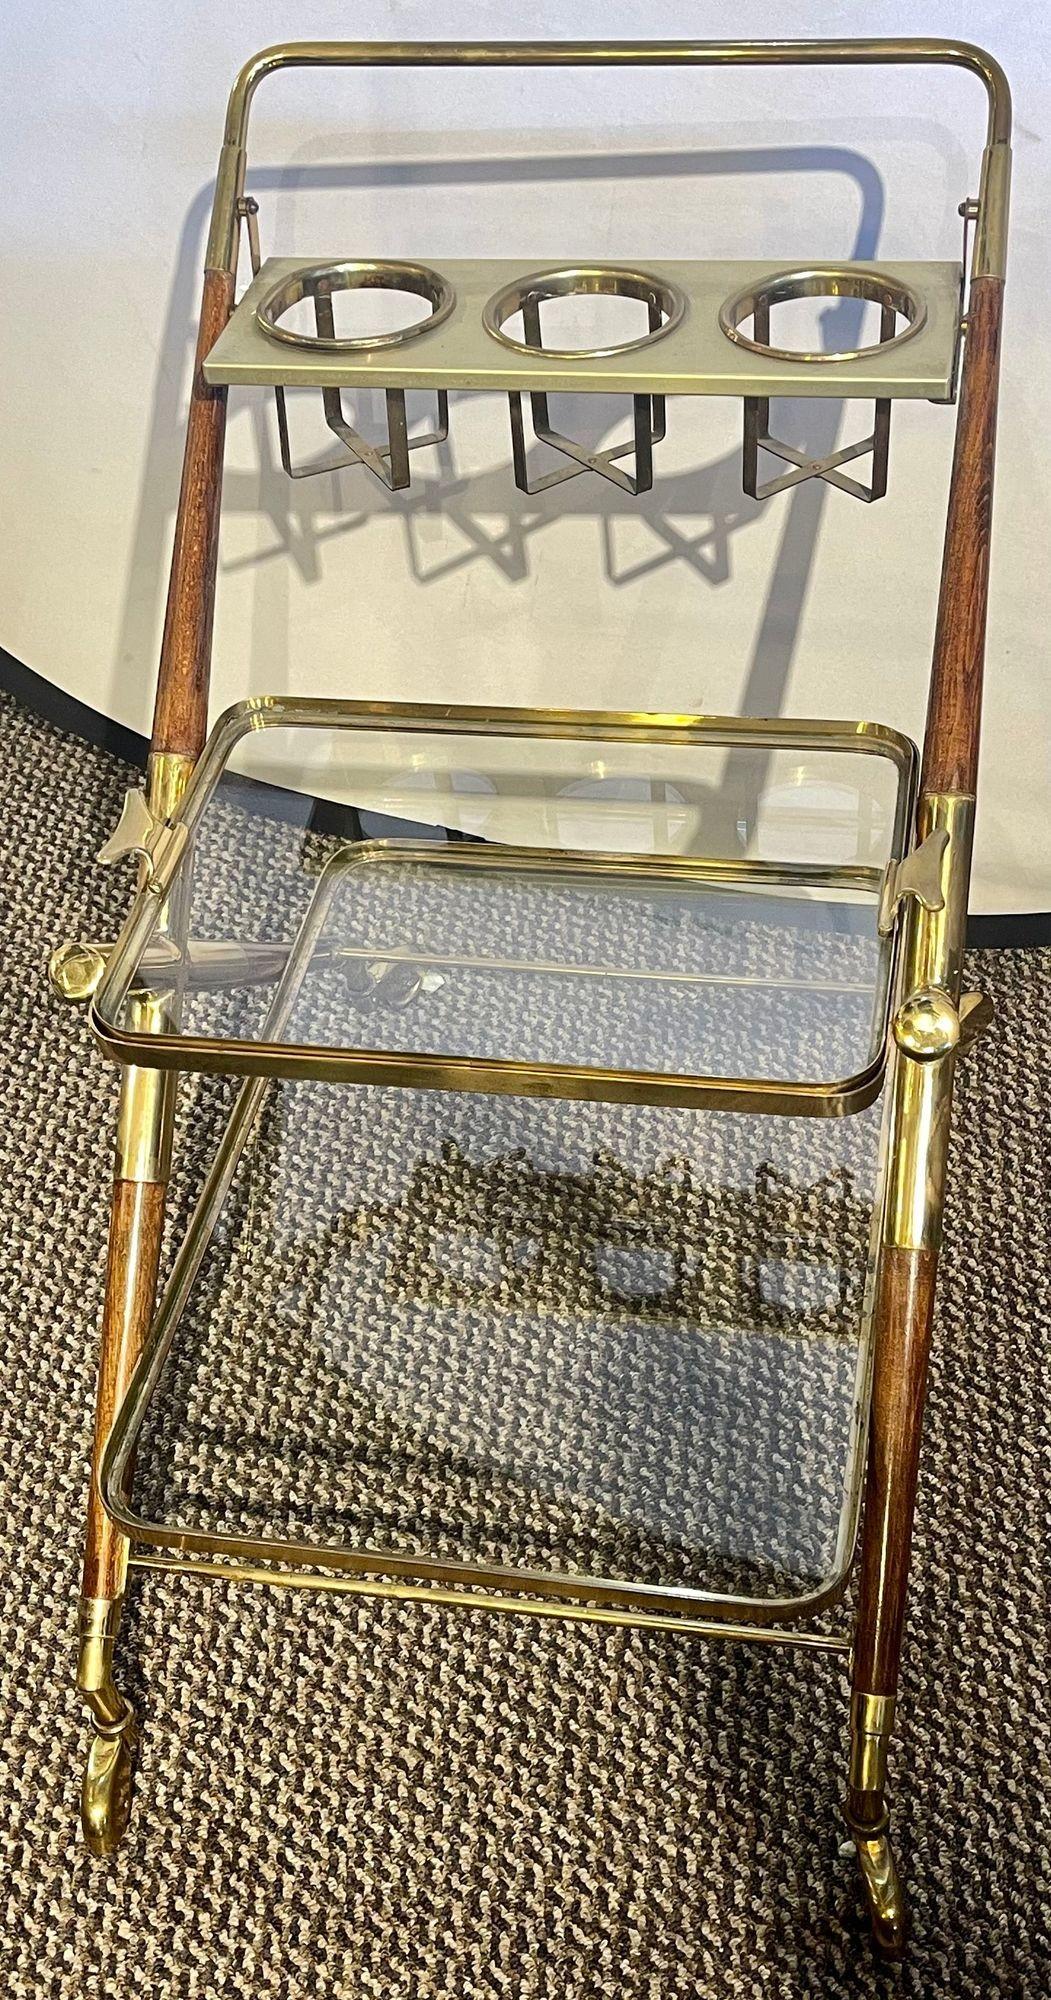 Italian Designer, Mid-Century Modern, Small Bar Cart, Teak, Glass, Italy, 1930s In Good Condition For Sale In Stamford, CT